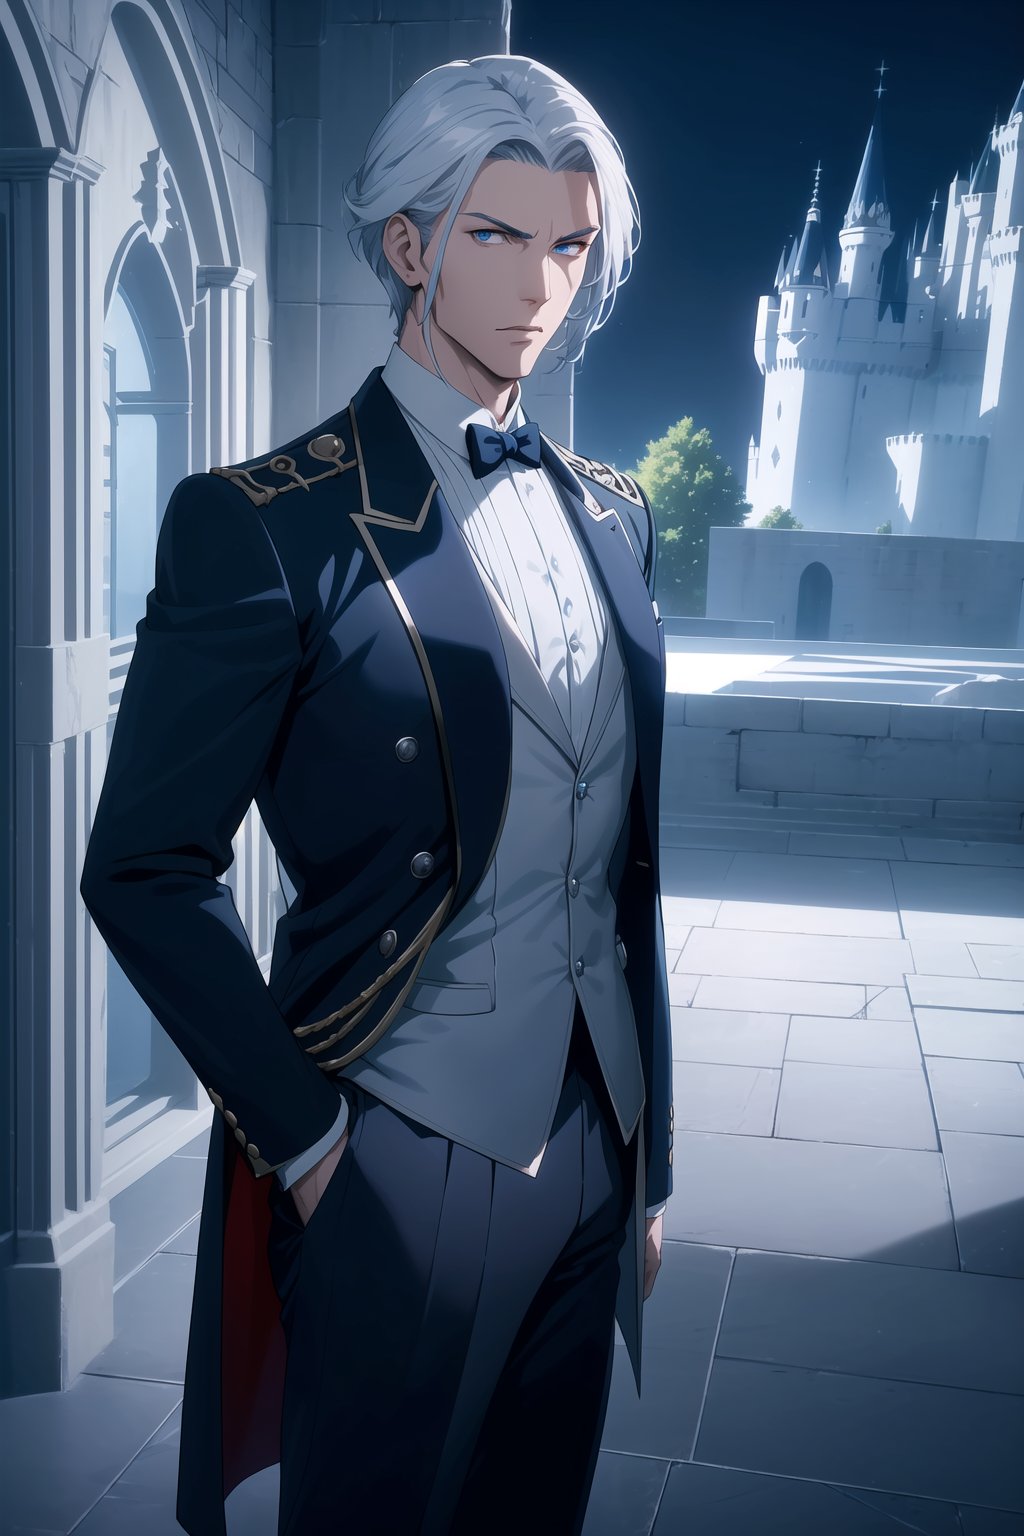 (Masterpiece, Best Quality), (A Strong 30-Year-Old Male Vampire Warrior), (Icy Blue Tousled Hair:1.4), (Sharp Silver Eyes), (Fair Skin), (Wearing Navy Blue Formal Attire with Silvery Accent:1.4), (Castle Hall at Night:1.4), (One Hand on Hips Pose:1.4), Centered, (Half Body Shot:1.6), (From Front Shot:1.4), Insane Details, Intricate Face Detail, Intricate Hand Details, Cinematic Shot and Lighting, Realistic and Vibrant Colors, Sharp Focus, Ultra Detailed, Realistic Images, Depth of Field, Incredibly Realistic Environment and Scene, Master Composition and Cinematography,castlevania style